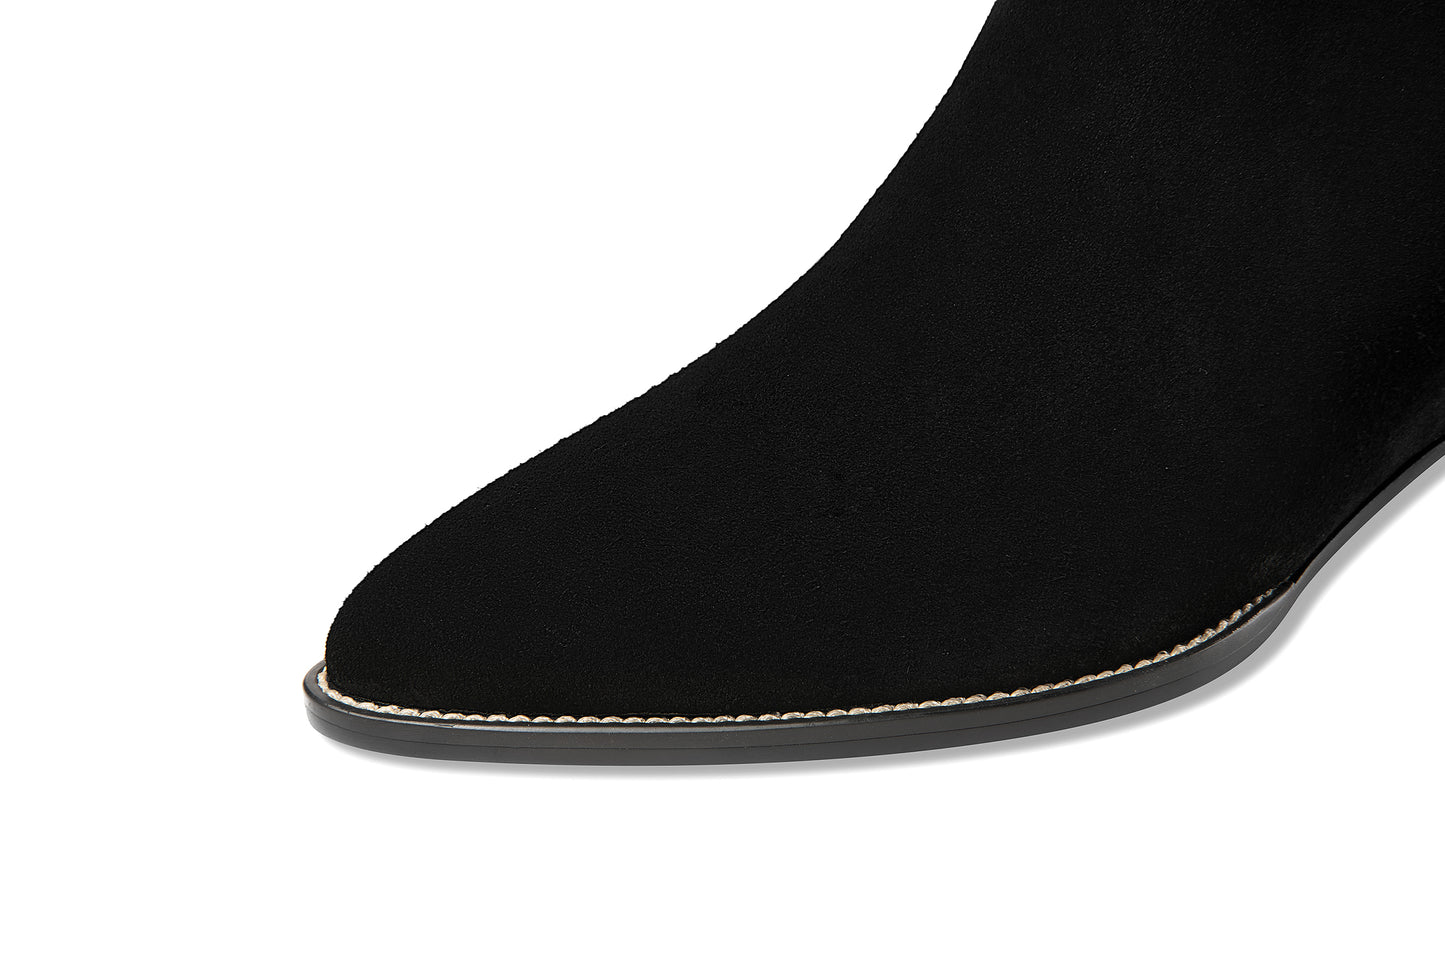 TinaCus Women's Pointed Toe Suede Leather Handmade Inner Heels Side Zip Up Casual Ankle Boots